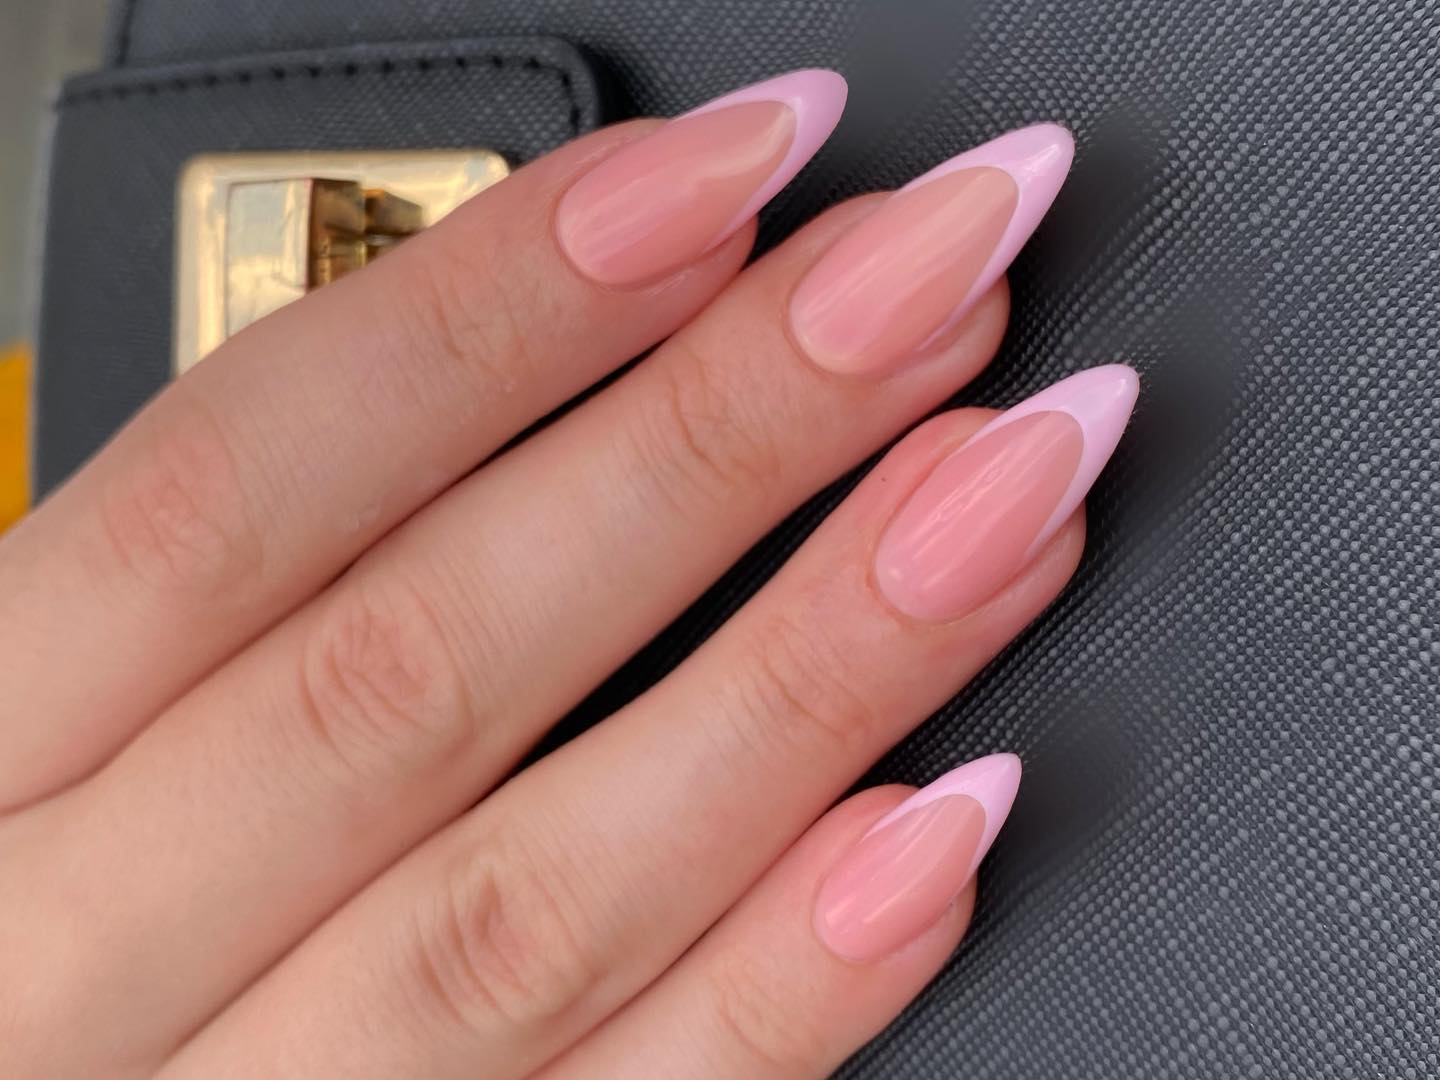 Oval French manicure with this light pink shade is a tad bit different, yet so classy and cute. If you enjoy longer nails and oval shapes that don’t crack or chip as easily, consider this beauty!